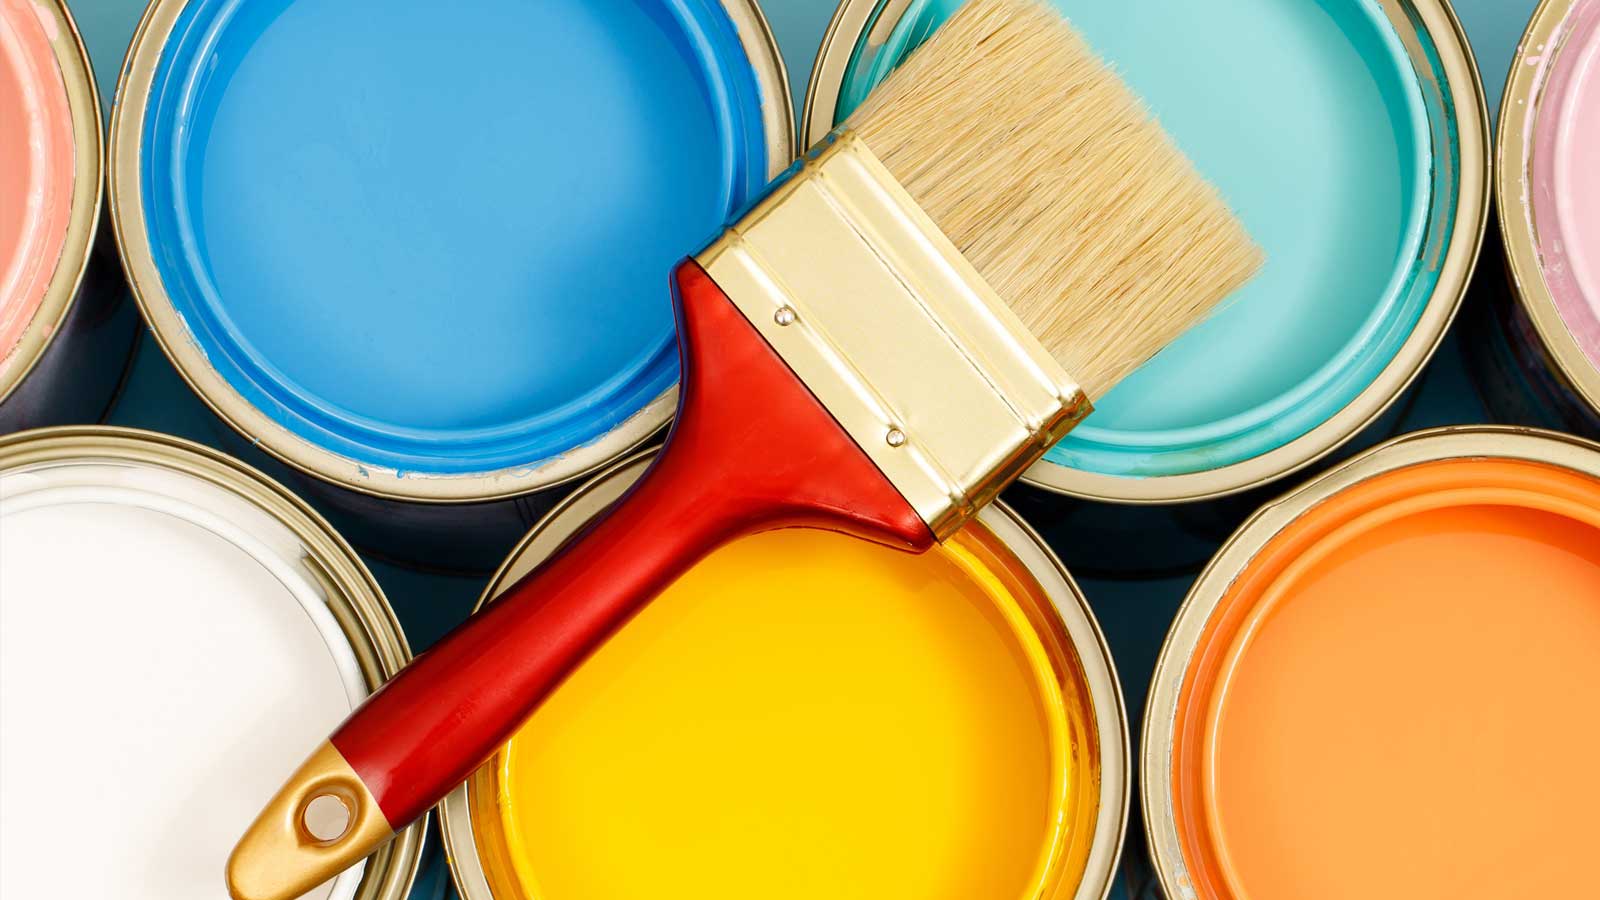 Taking Care of Your New Paint